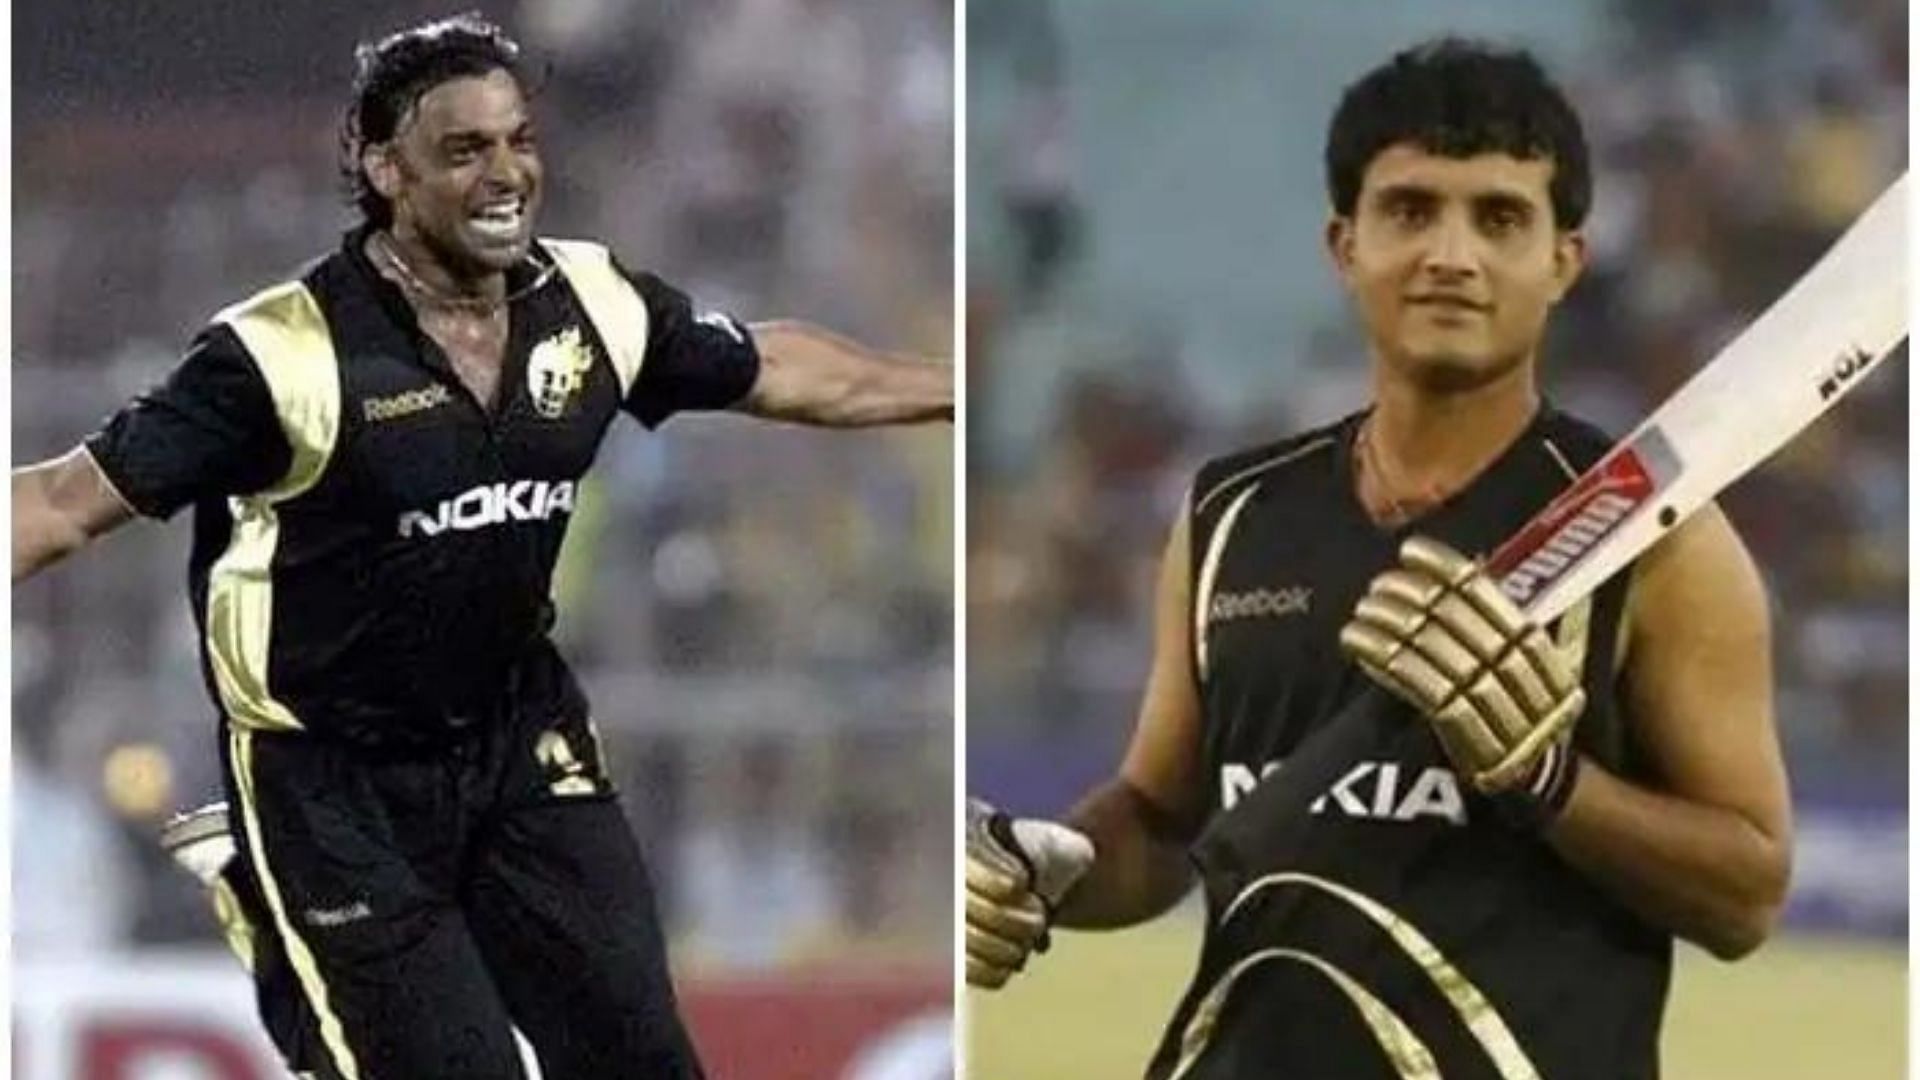 Shoaib Akhtar (L) and Sourav Ganguly during their KKR days. (P.C.:Twitter)